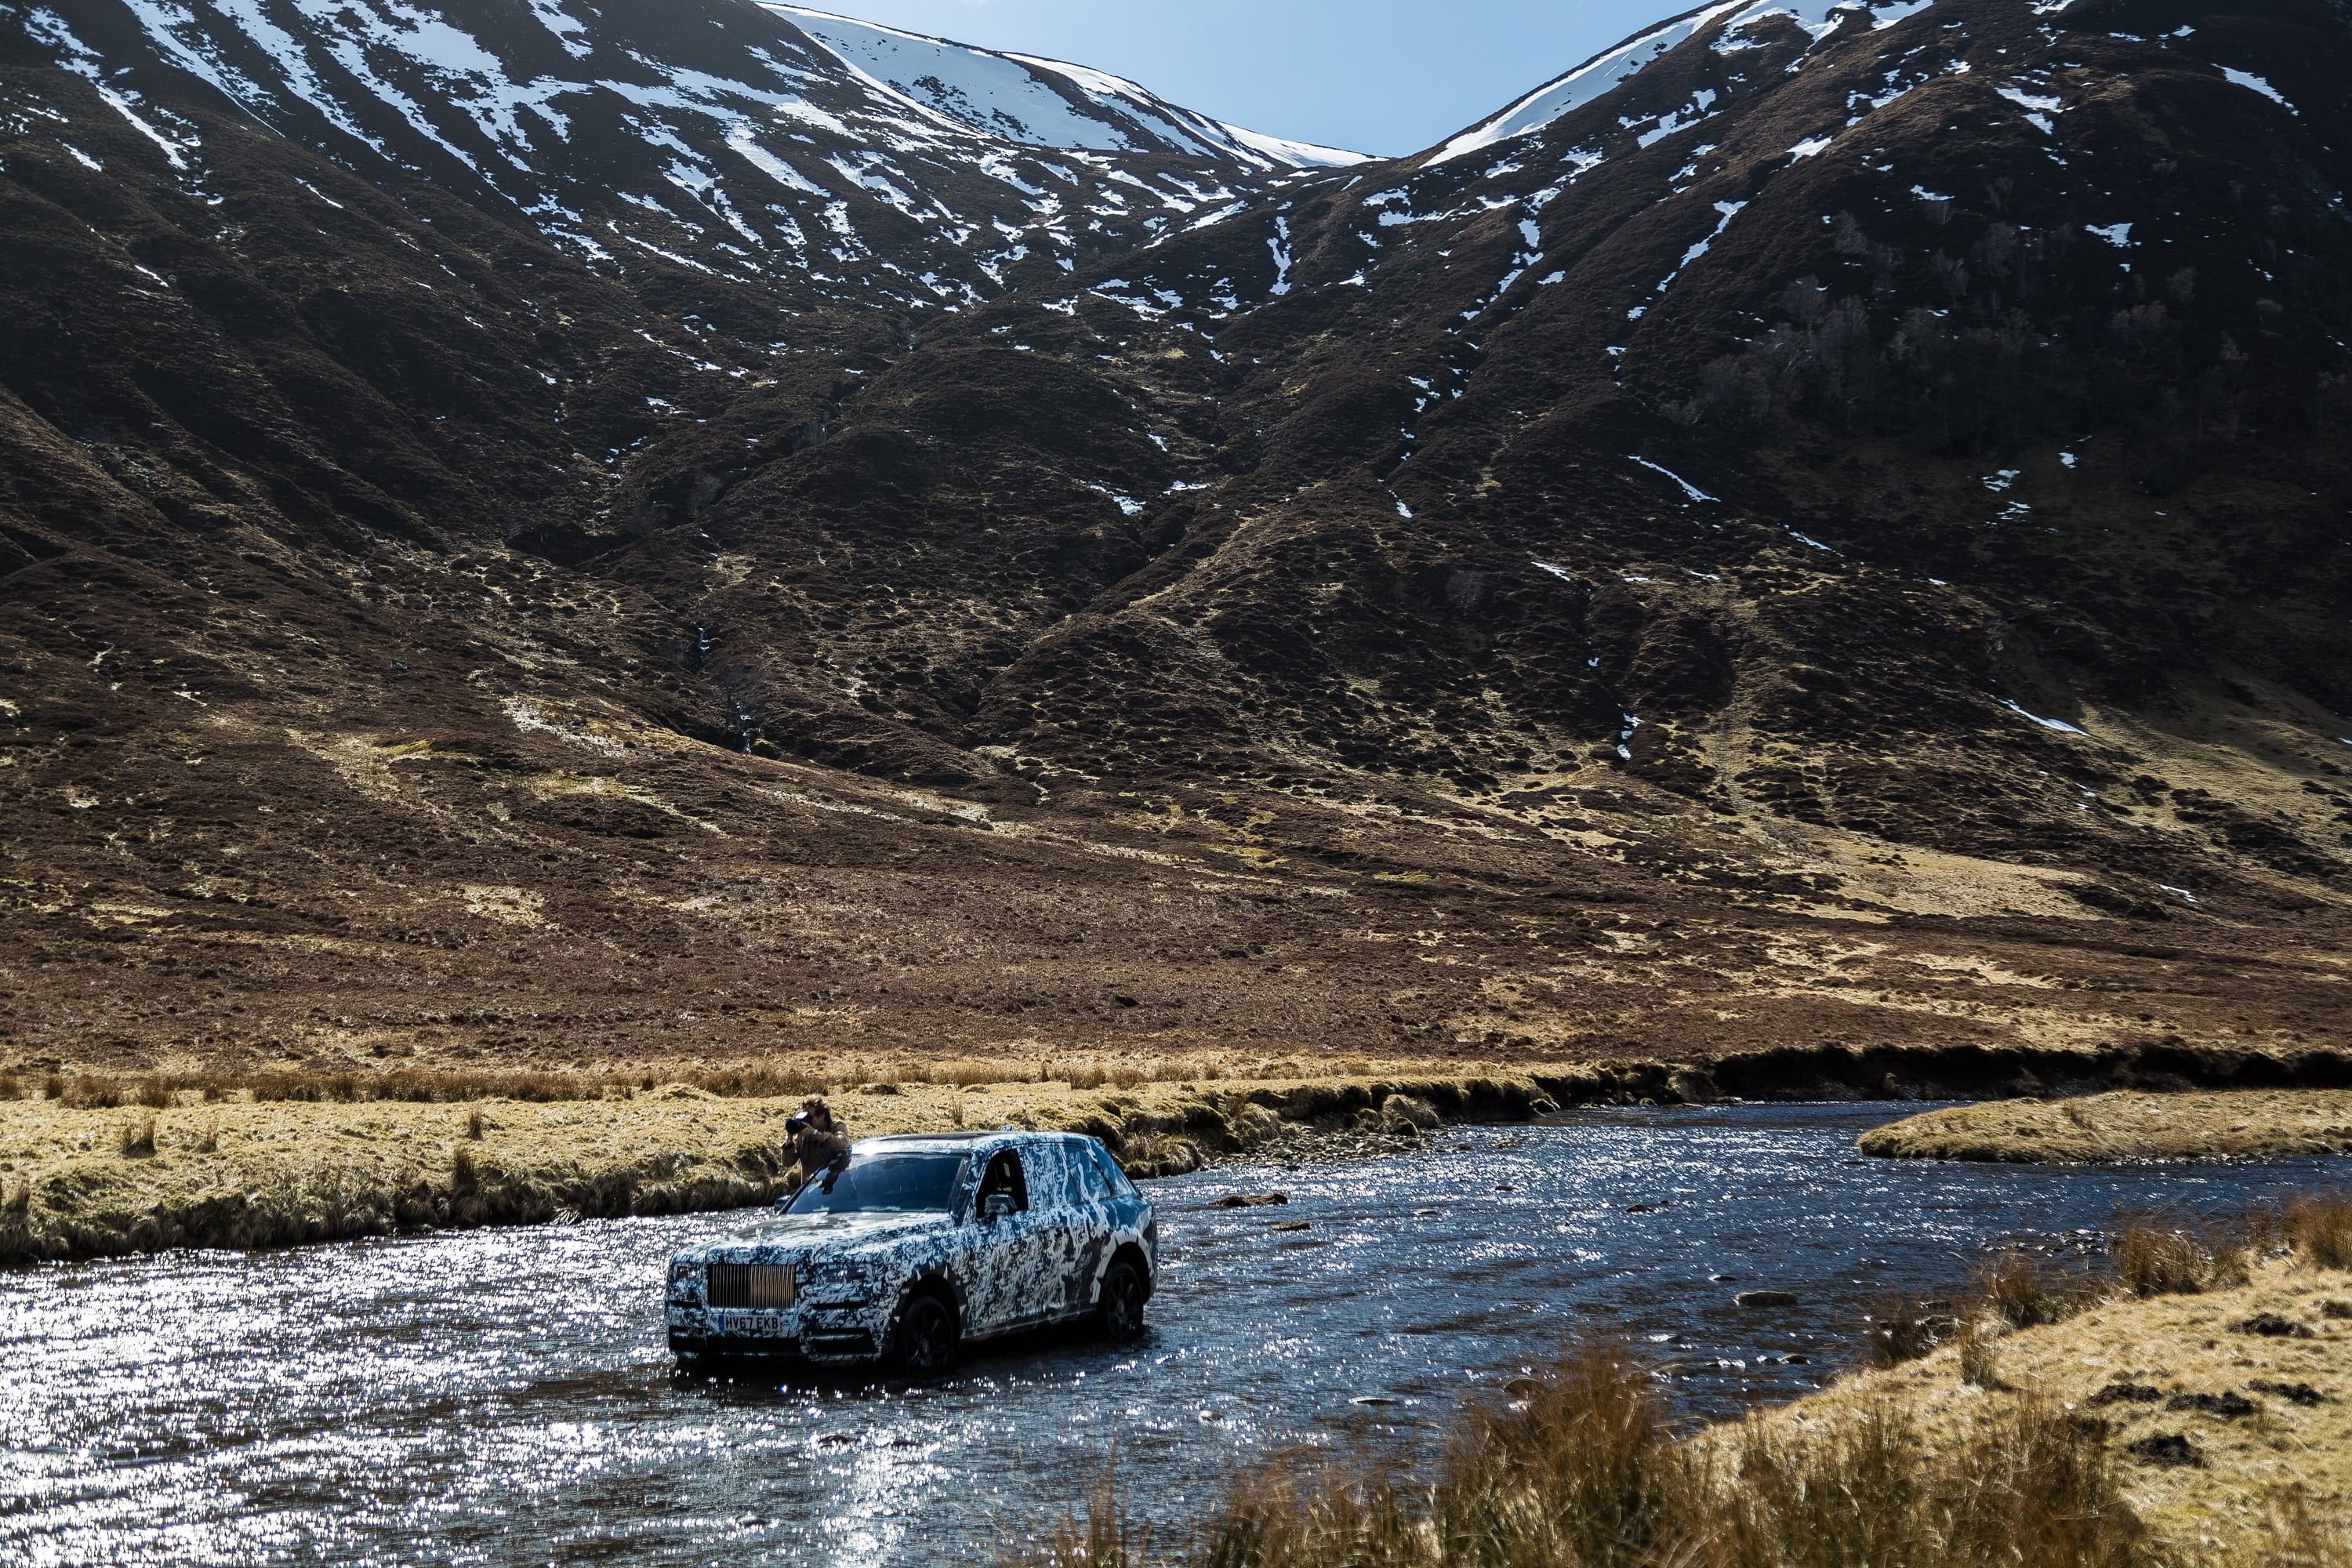 Cory Richards with the Rolls-Royce in the great outdoors.